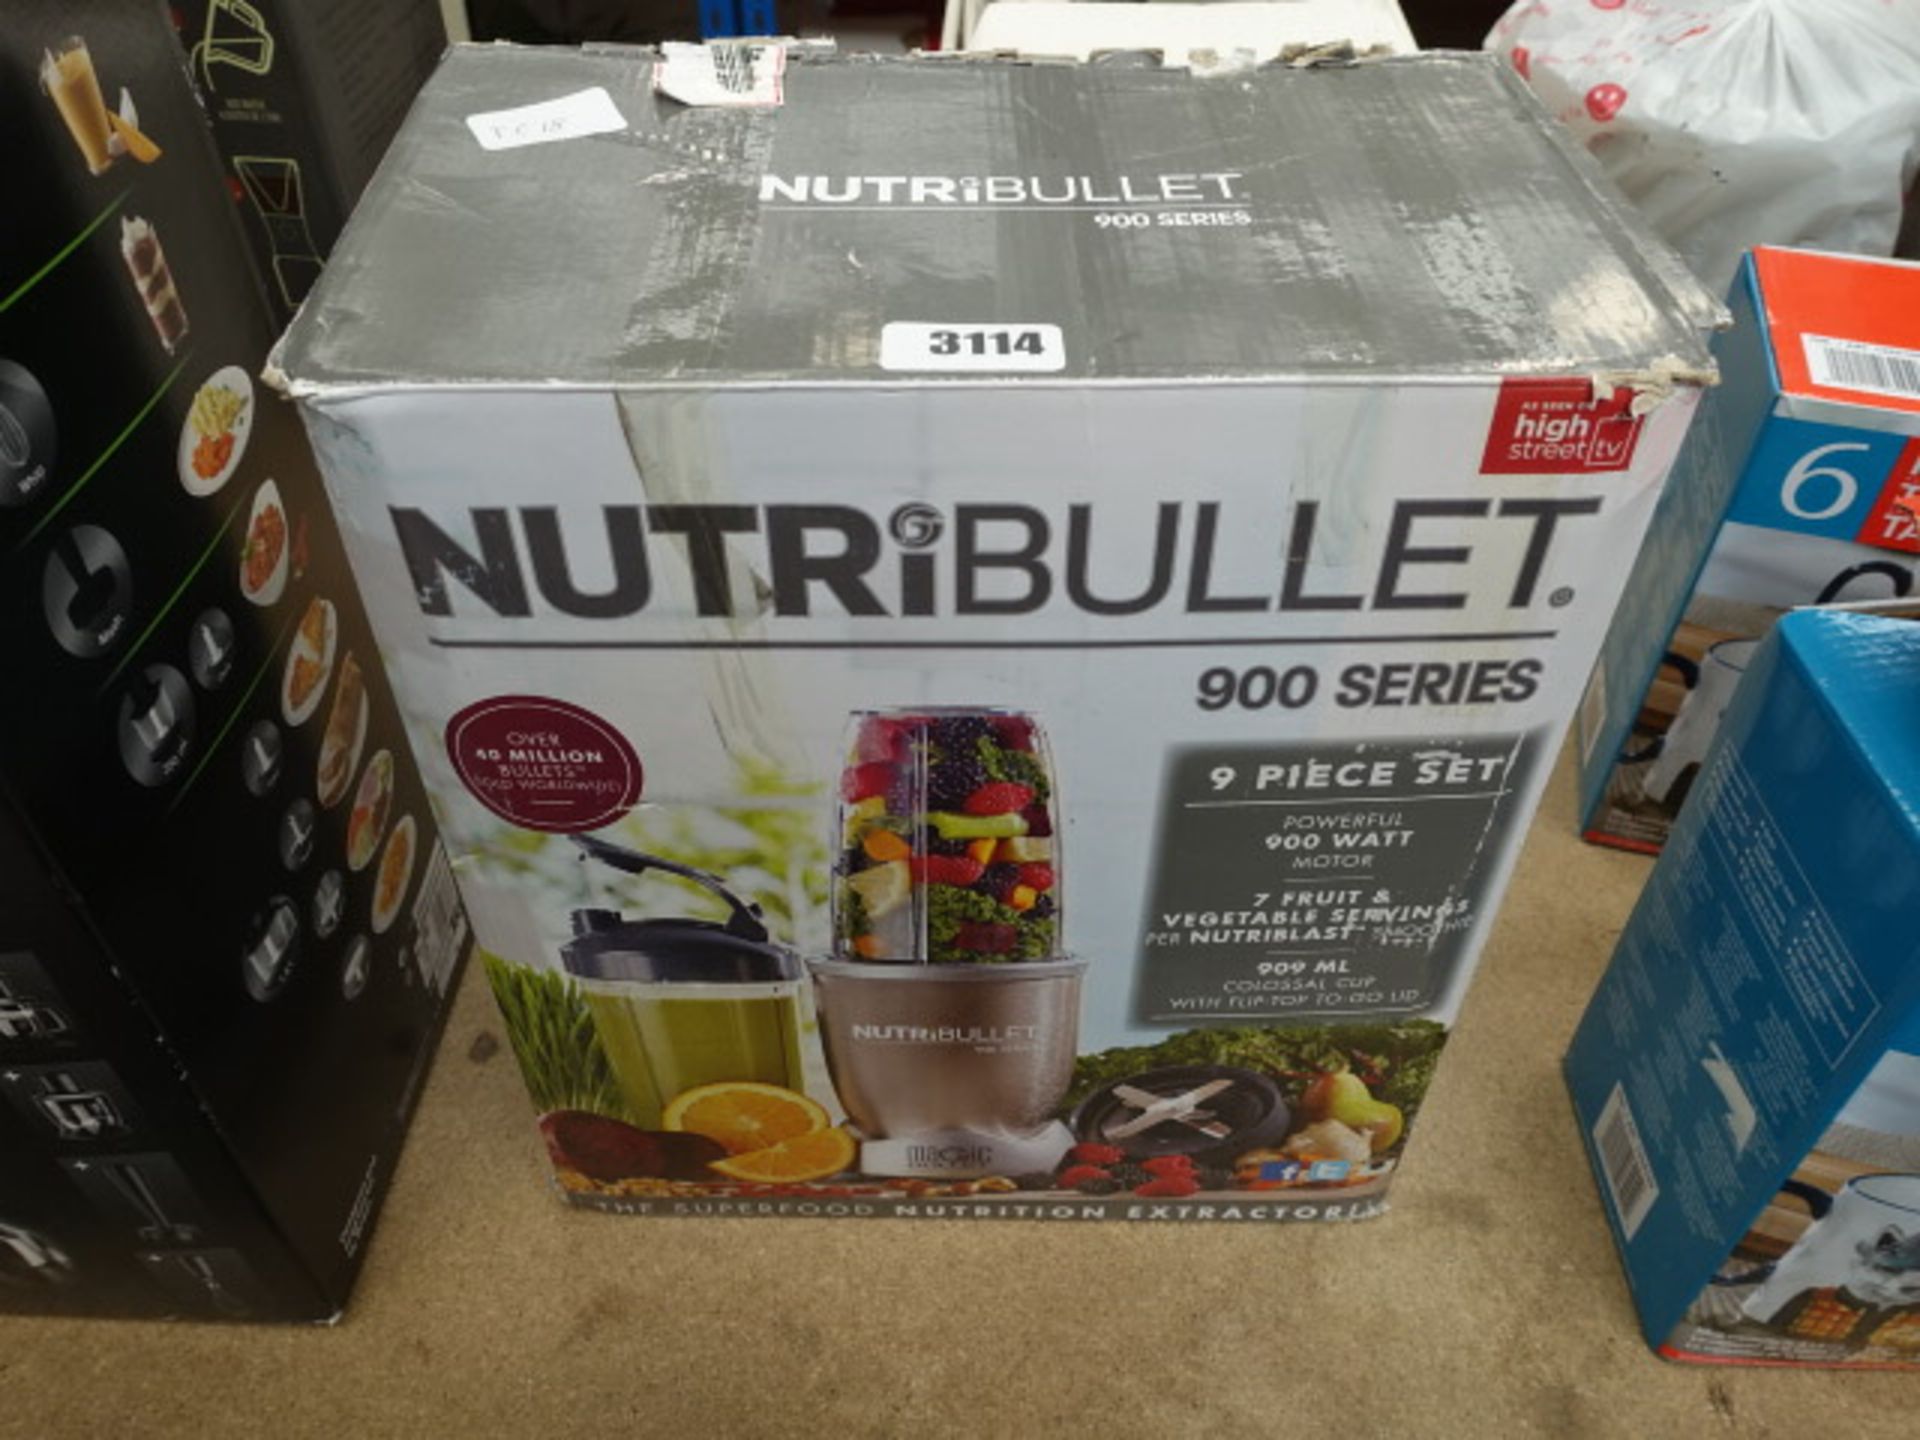 Boxed Nutribullet nutrition extractor